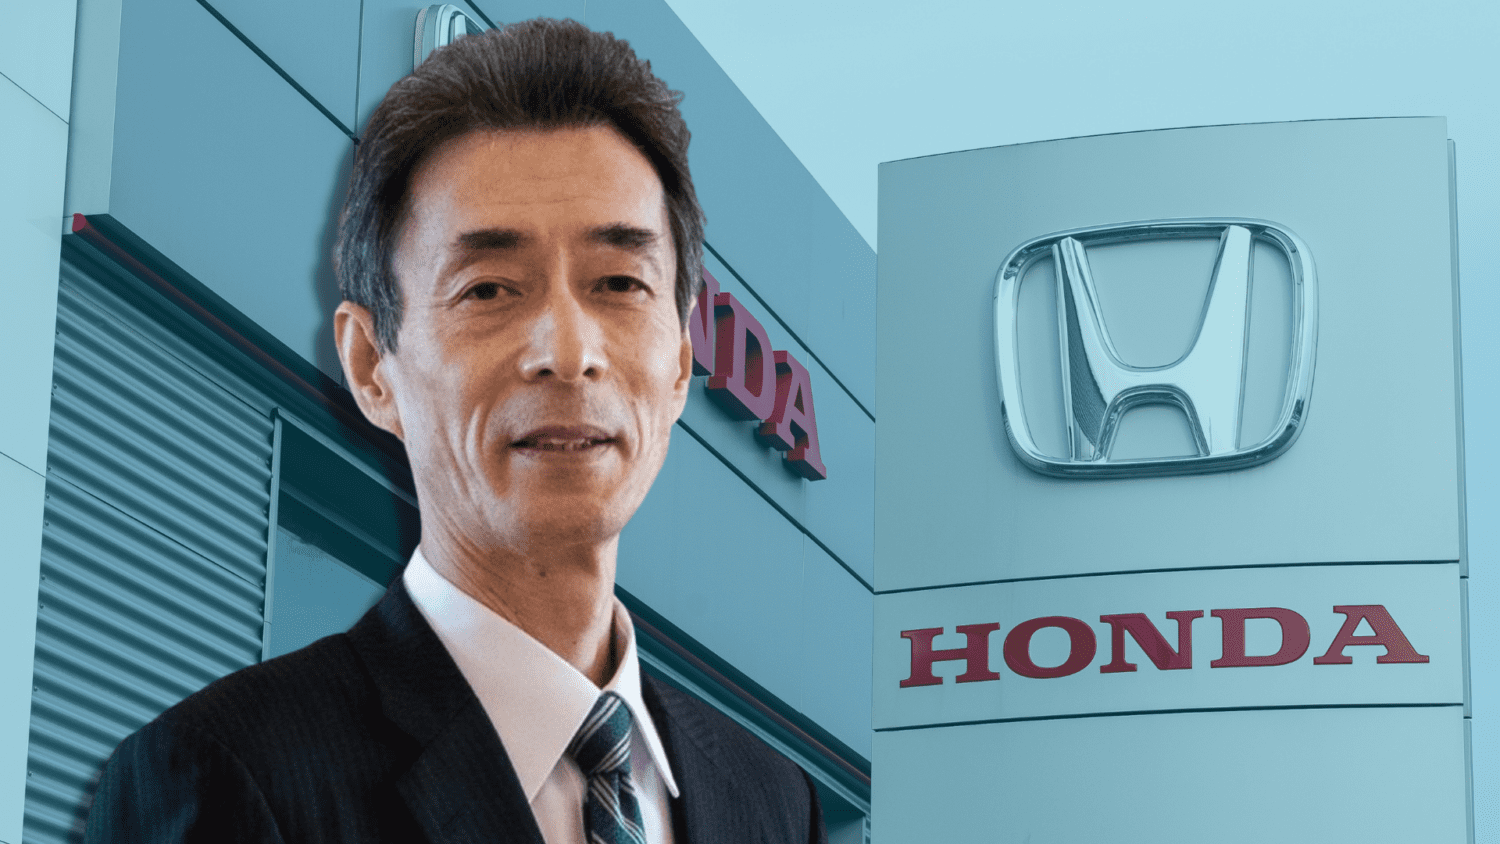 Honda's venture into CPO leasing is just one indicator of the innovative paths dealerships might explore to thrive in the future.